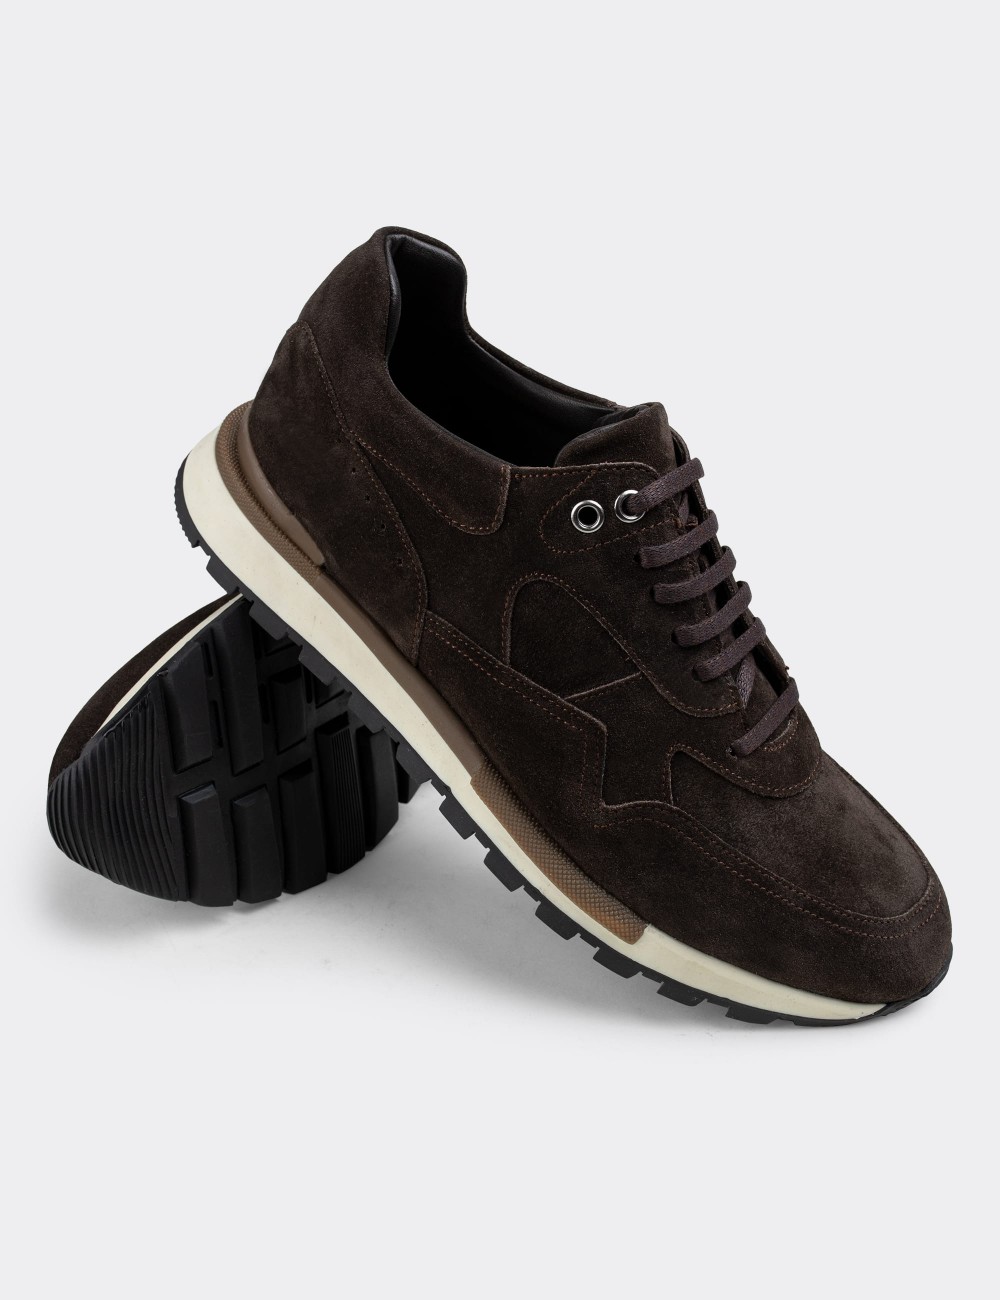 Brown Suede Leather Sneakers - 01818MKHVT01